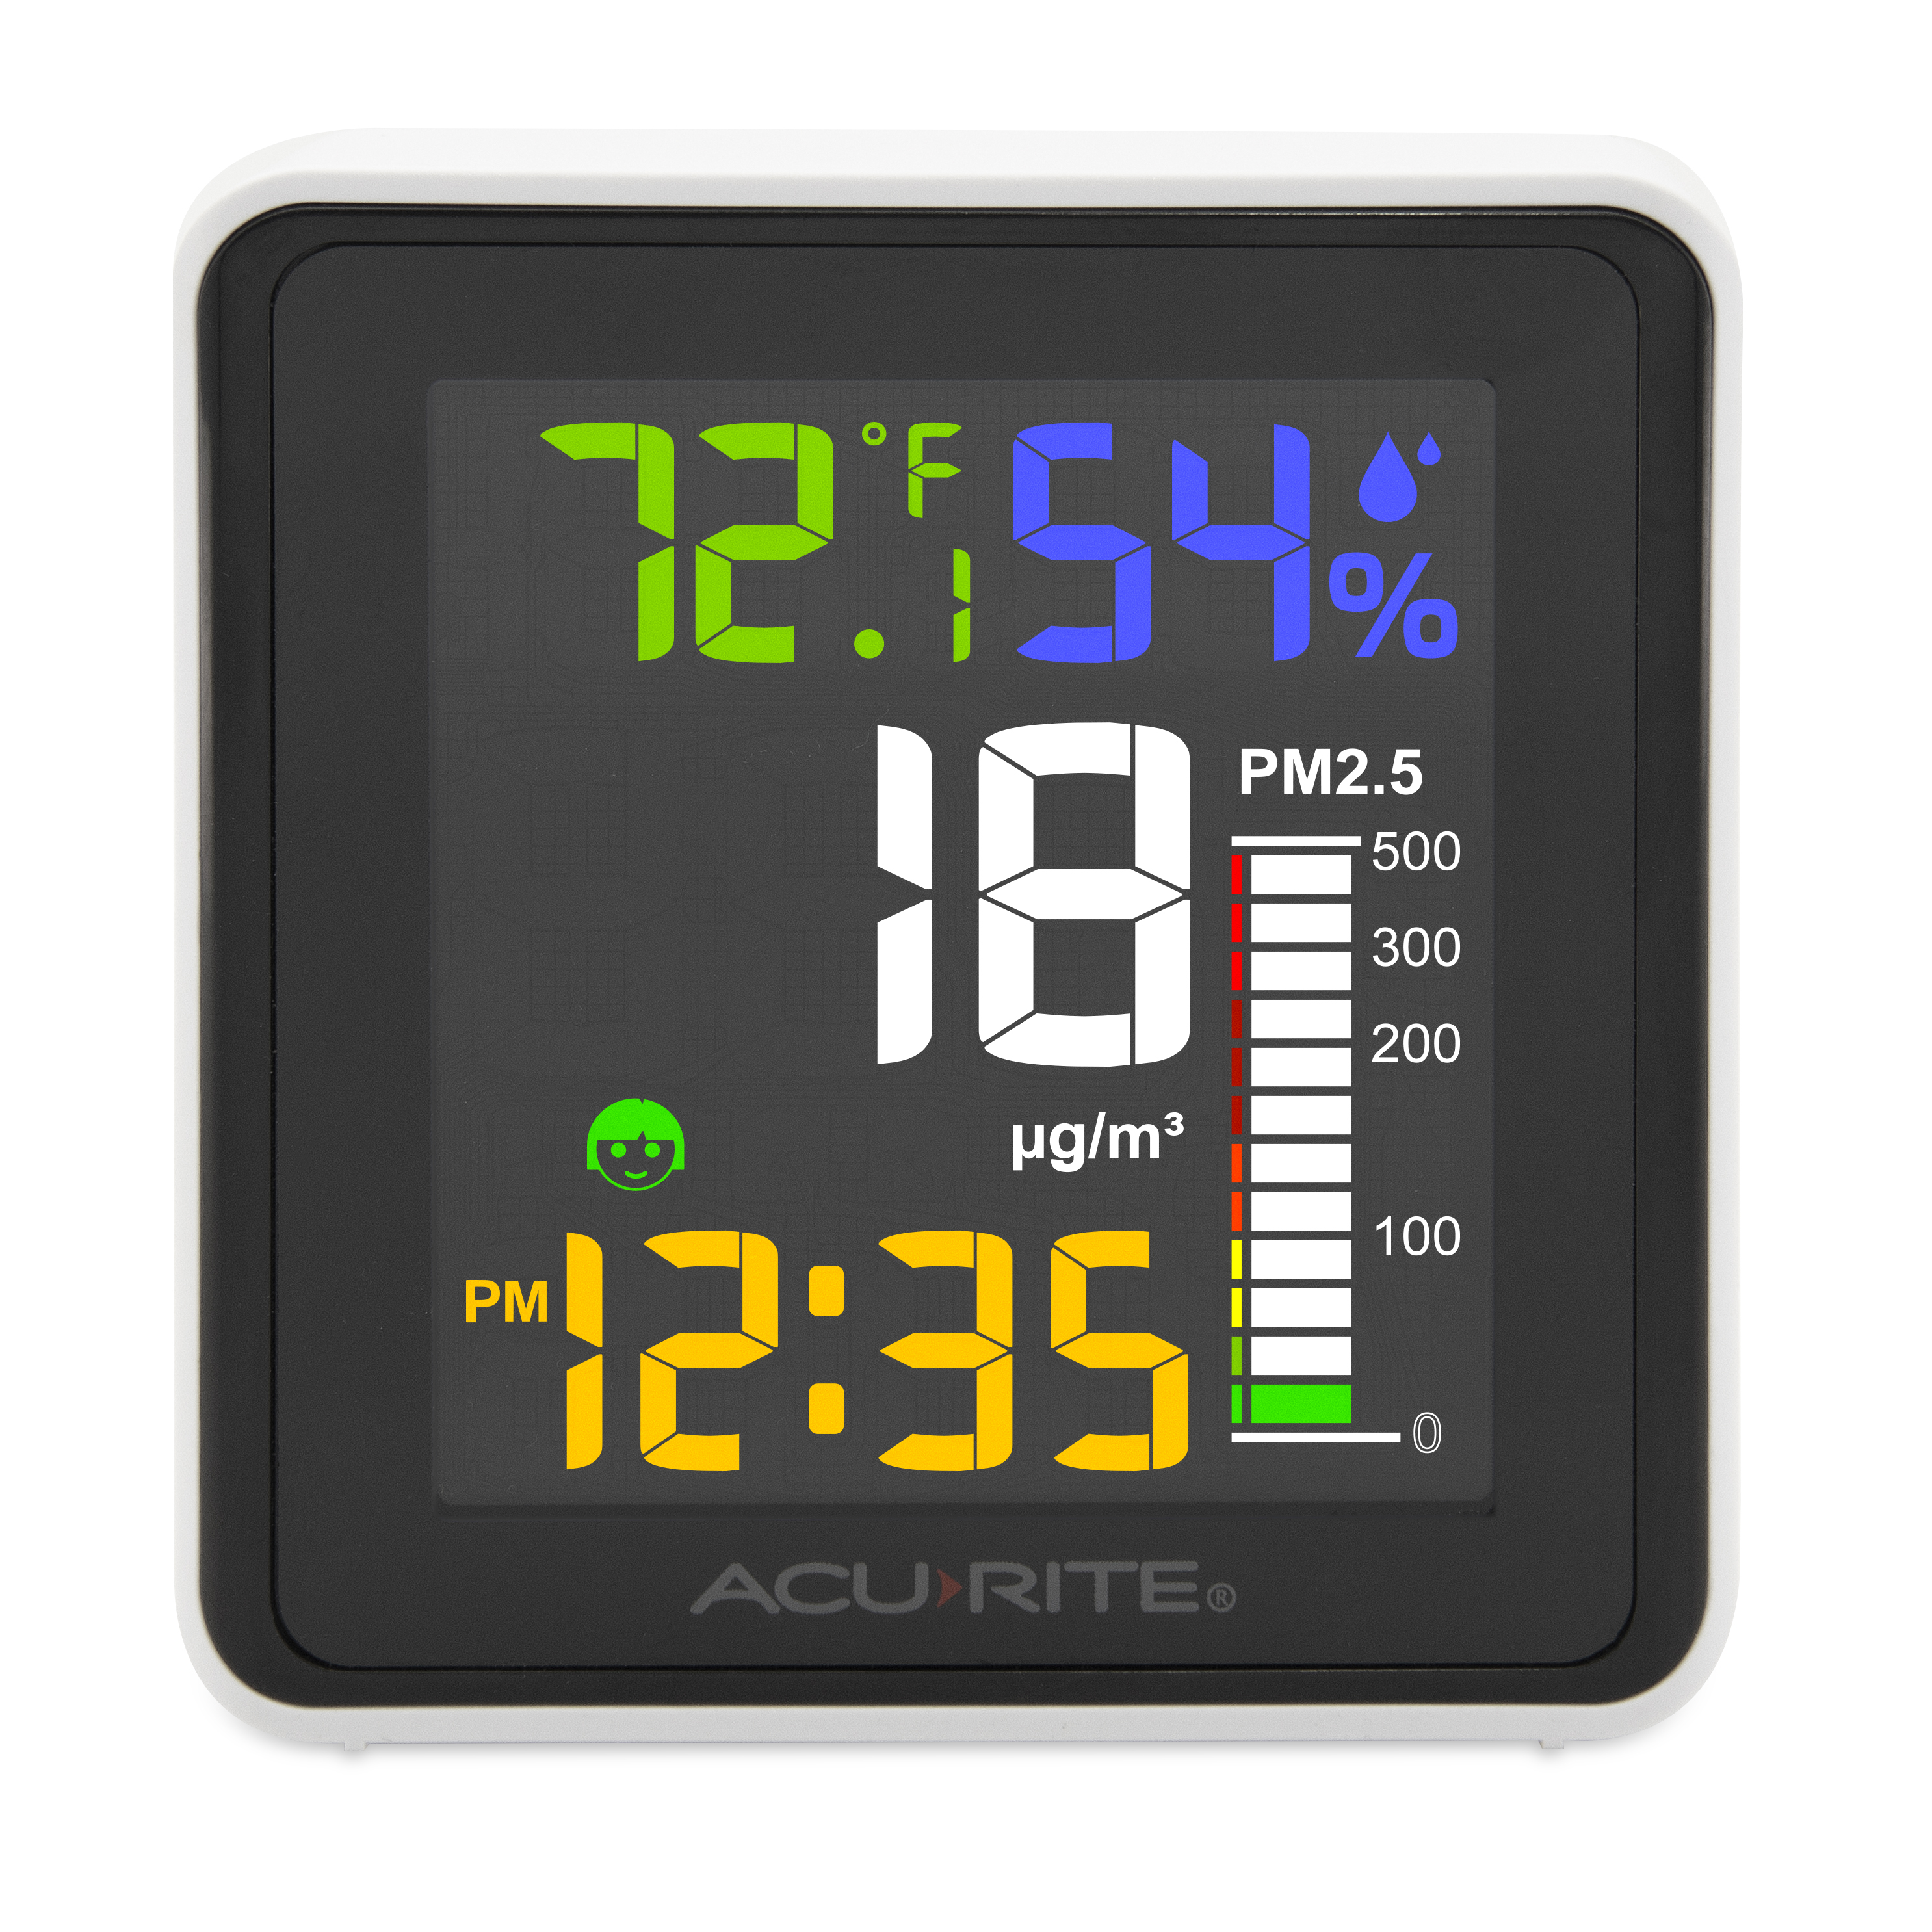 AcuRite AIR® Indoor Air Quality Monitor with PM2.5, Temperature, and Humidity Measurements (01412M) - image 4 of 9